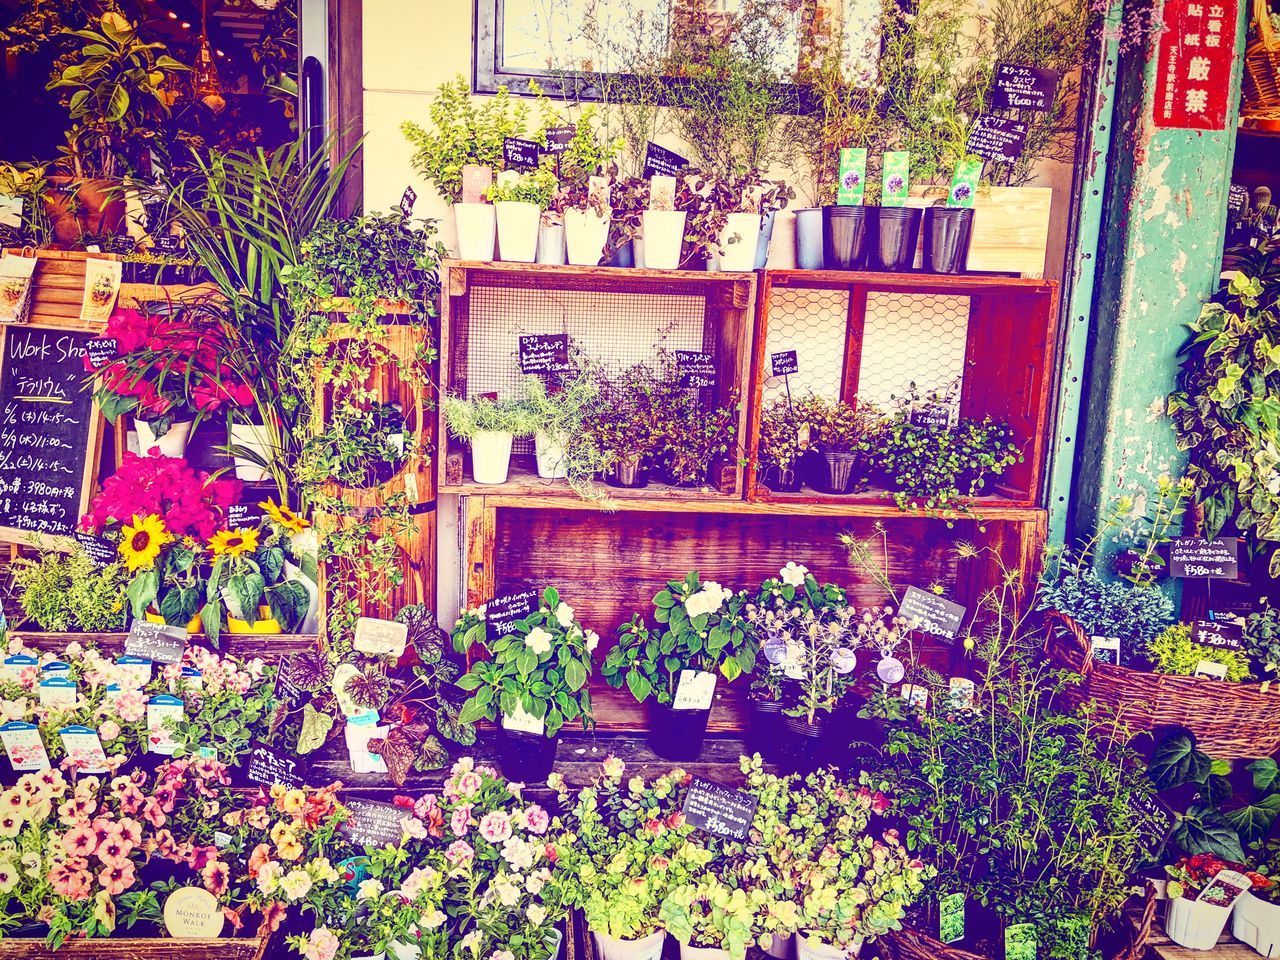 POTTED PLANTS AT MARKET STALL IN SHOP